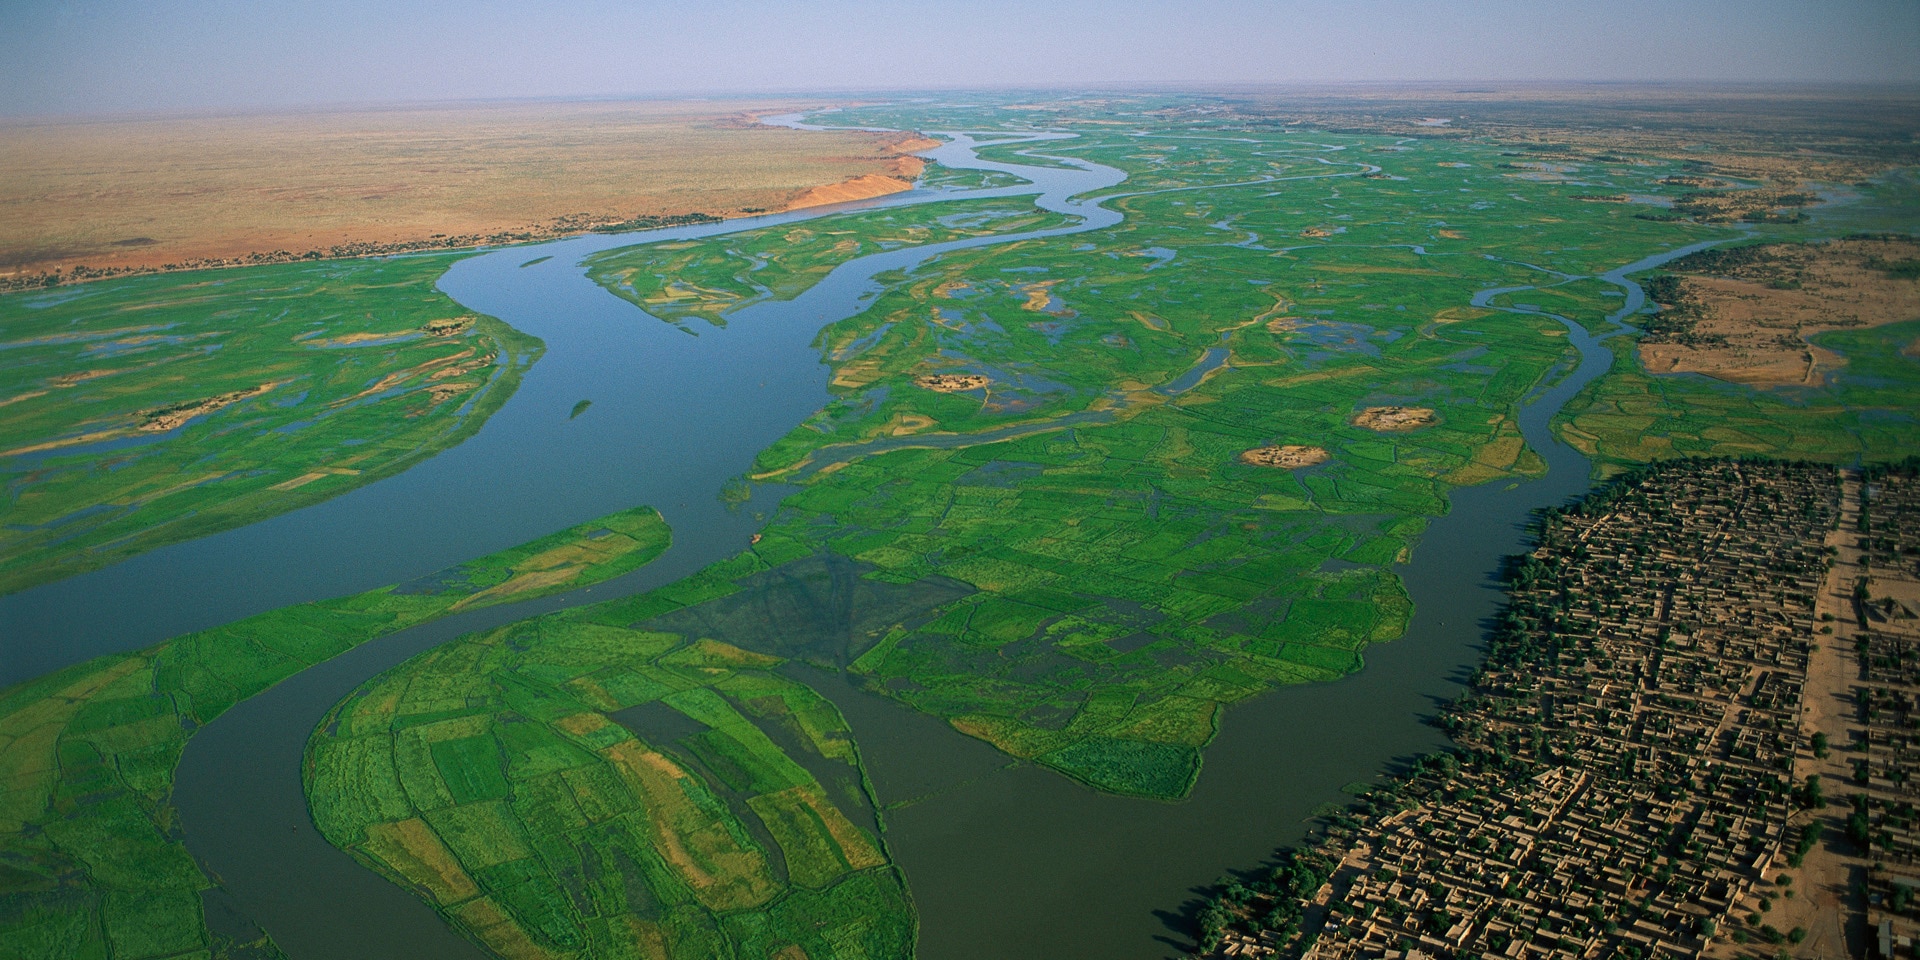  Rice fields in the Niger River in Mali.